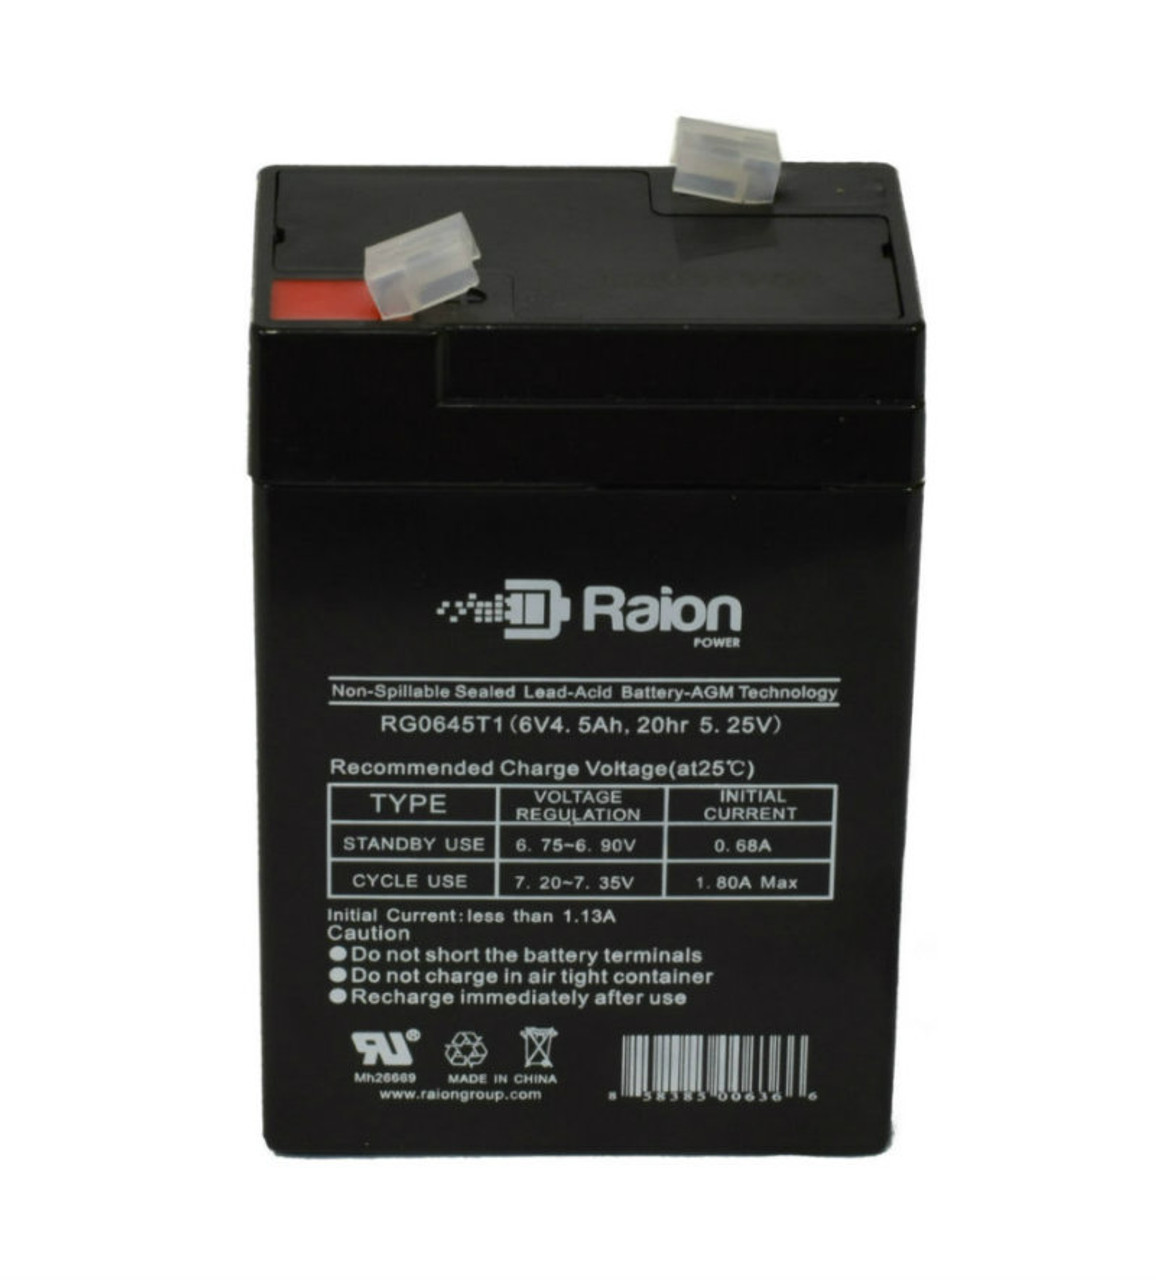 Raion Power RG0645T1 Replacement Battery Cartridge for Nellcor N-600 Oximax